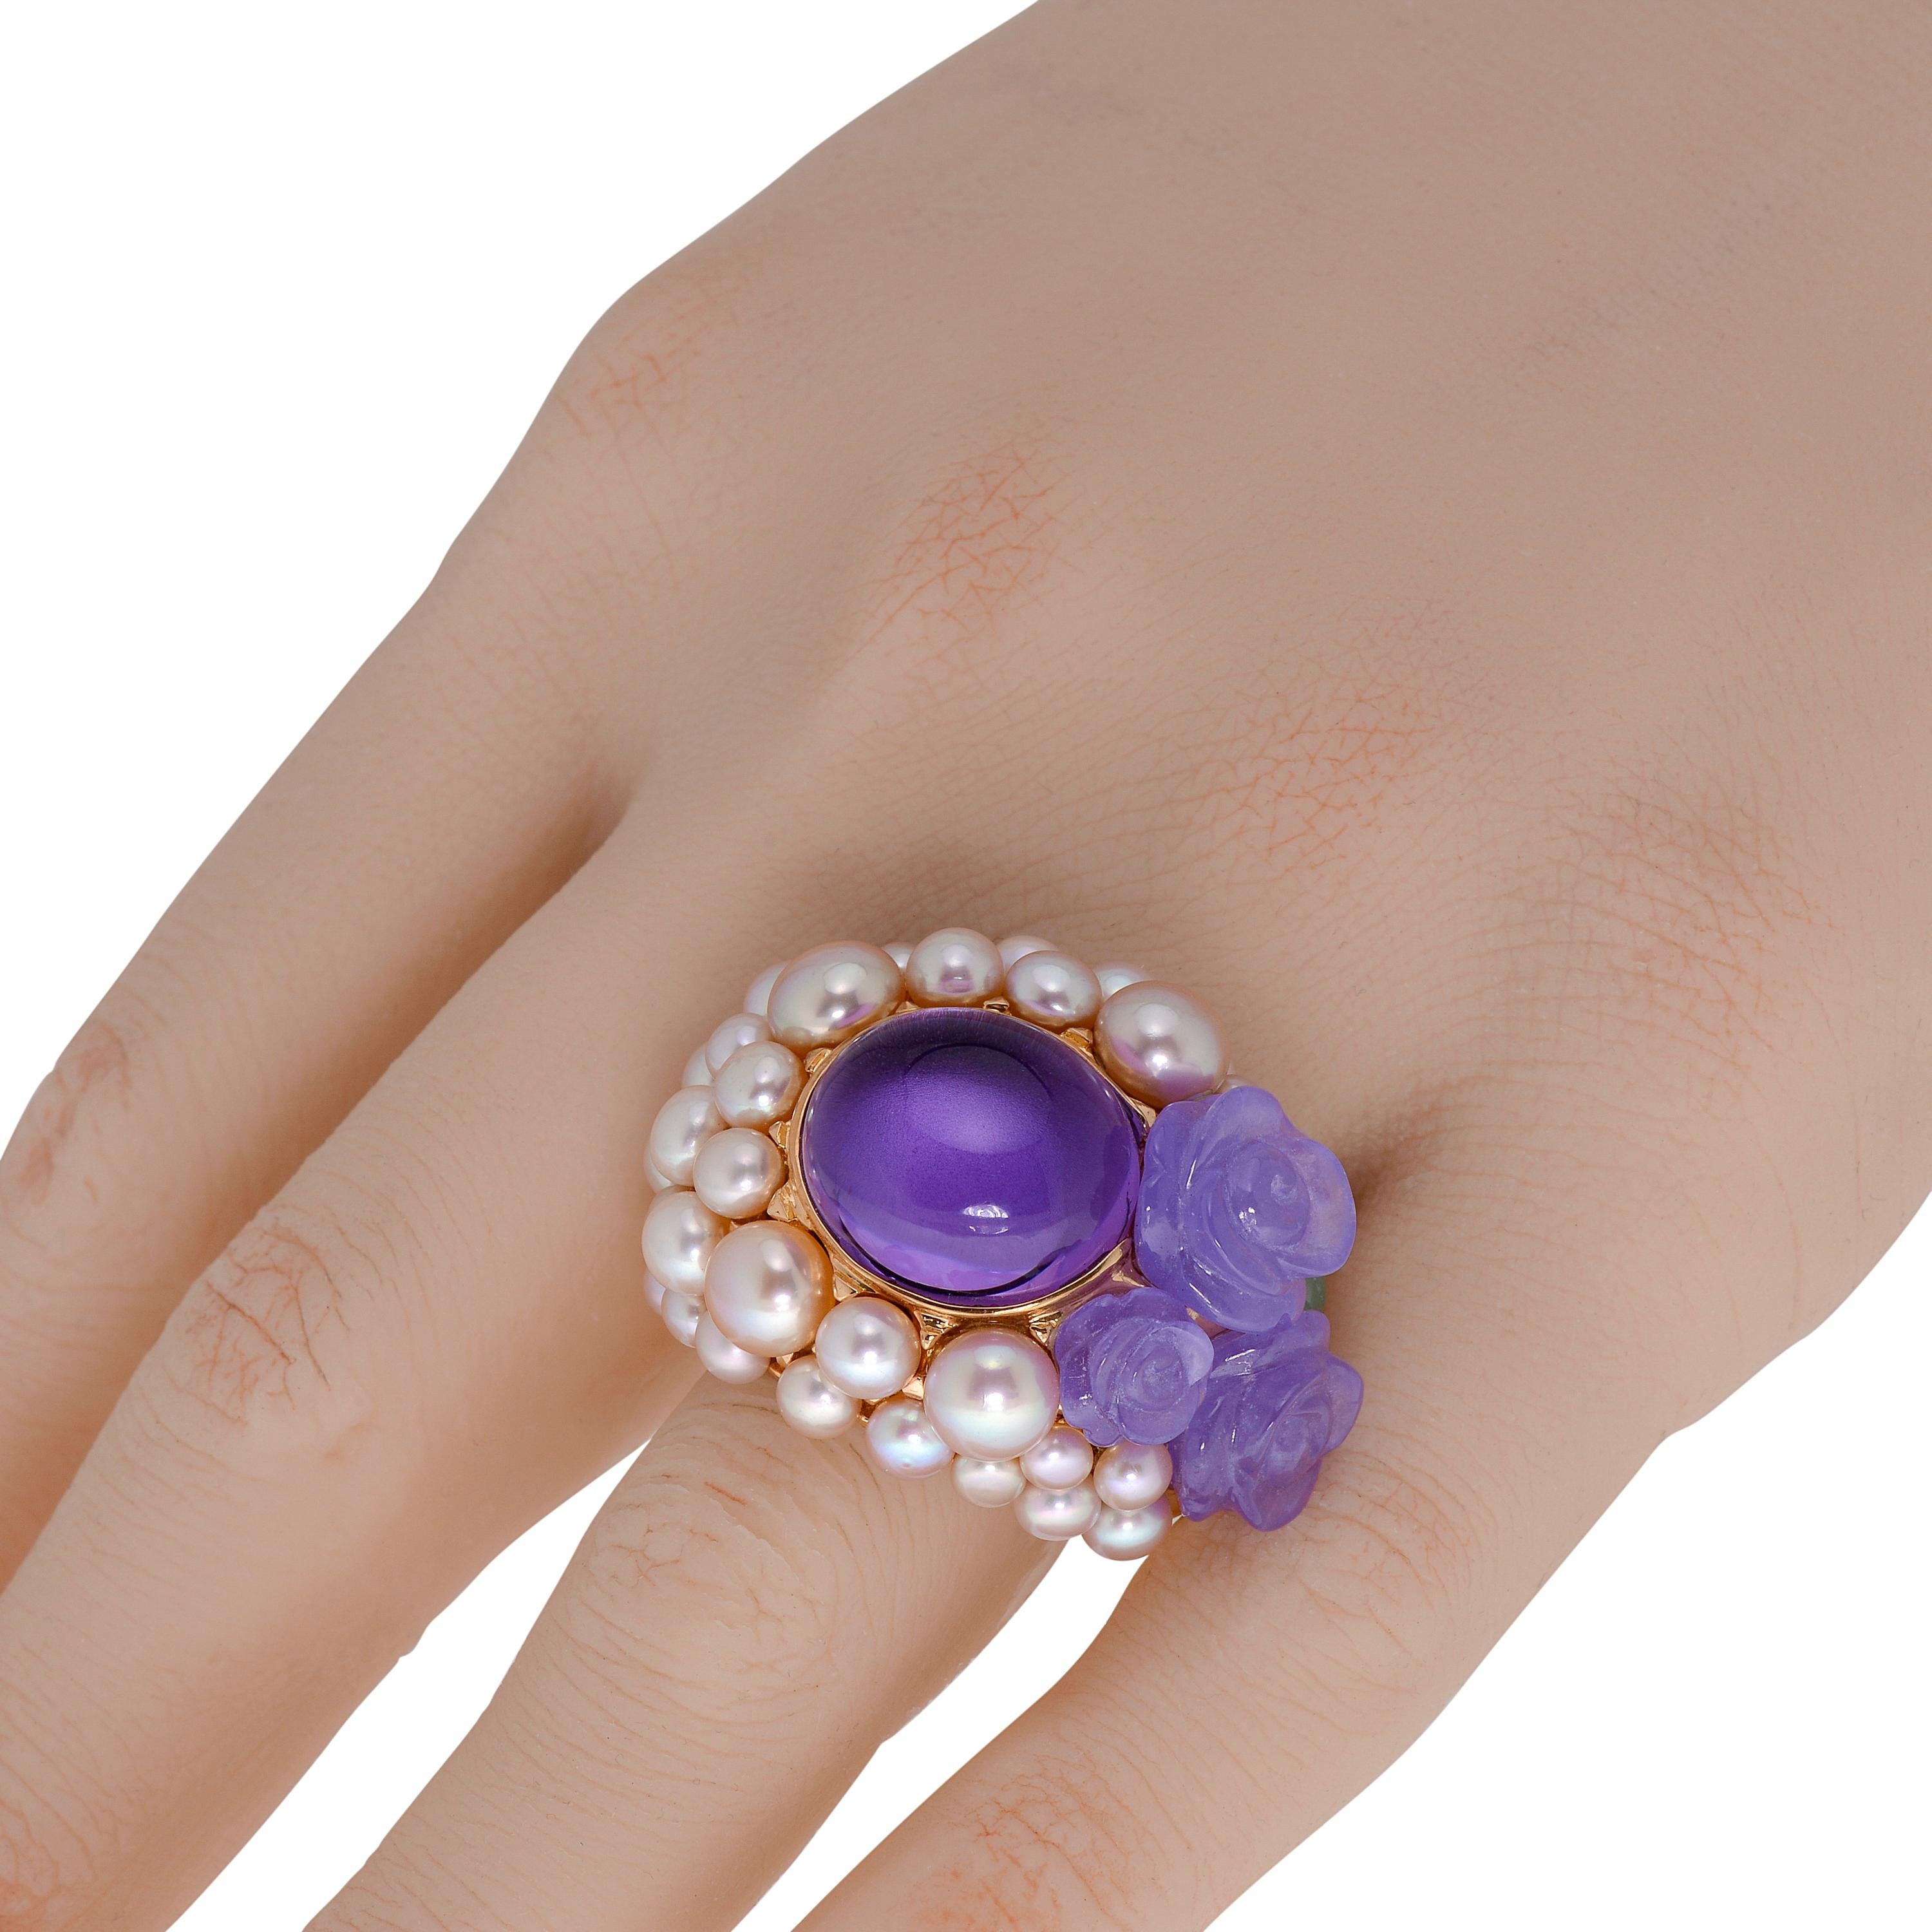 This dazzling Mimi Milano 18K rose gold cocktail ring features 3-5mm violet cultured pearls and 11.83ct. tw. cabochon amethyst in perfect harmony with Lavender Jade roses and Green Jade . The ring size is 8.5. The band width is 7mm. The weight is